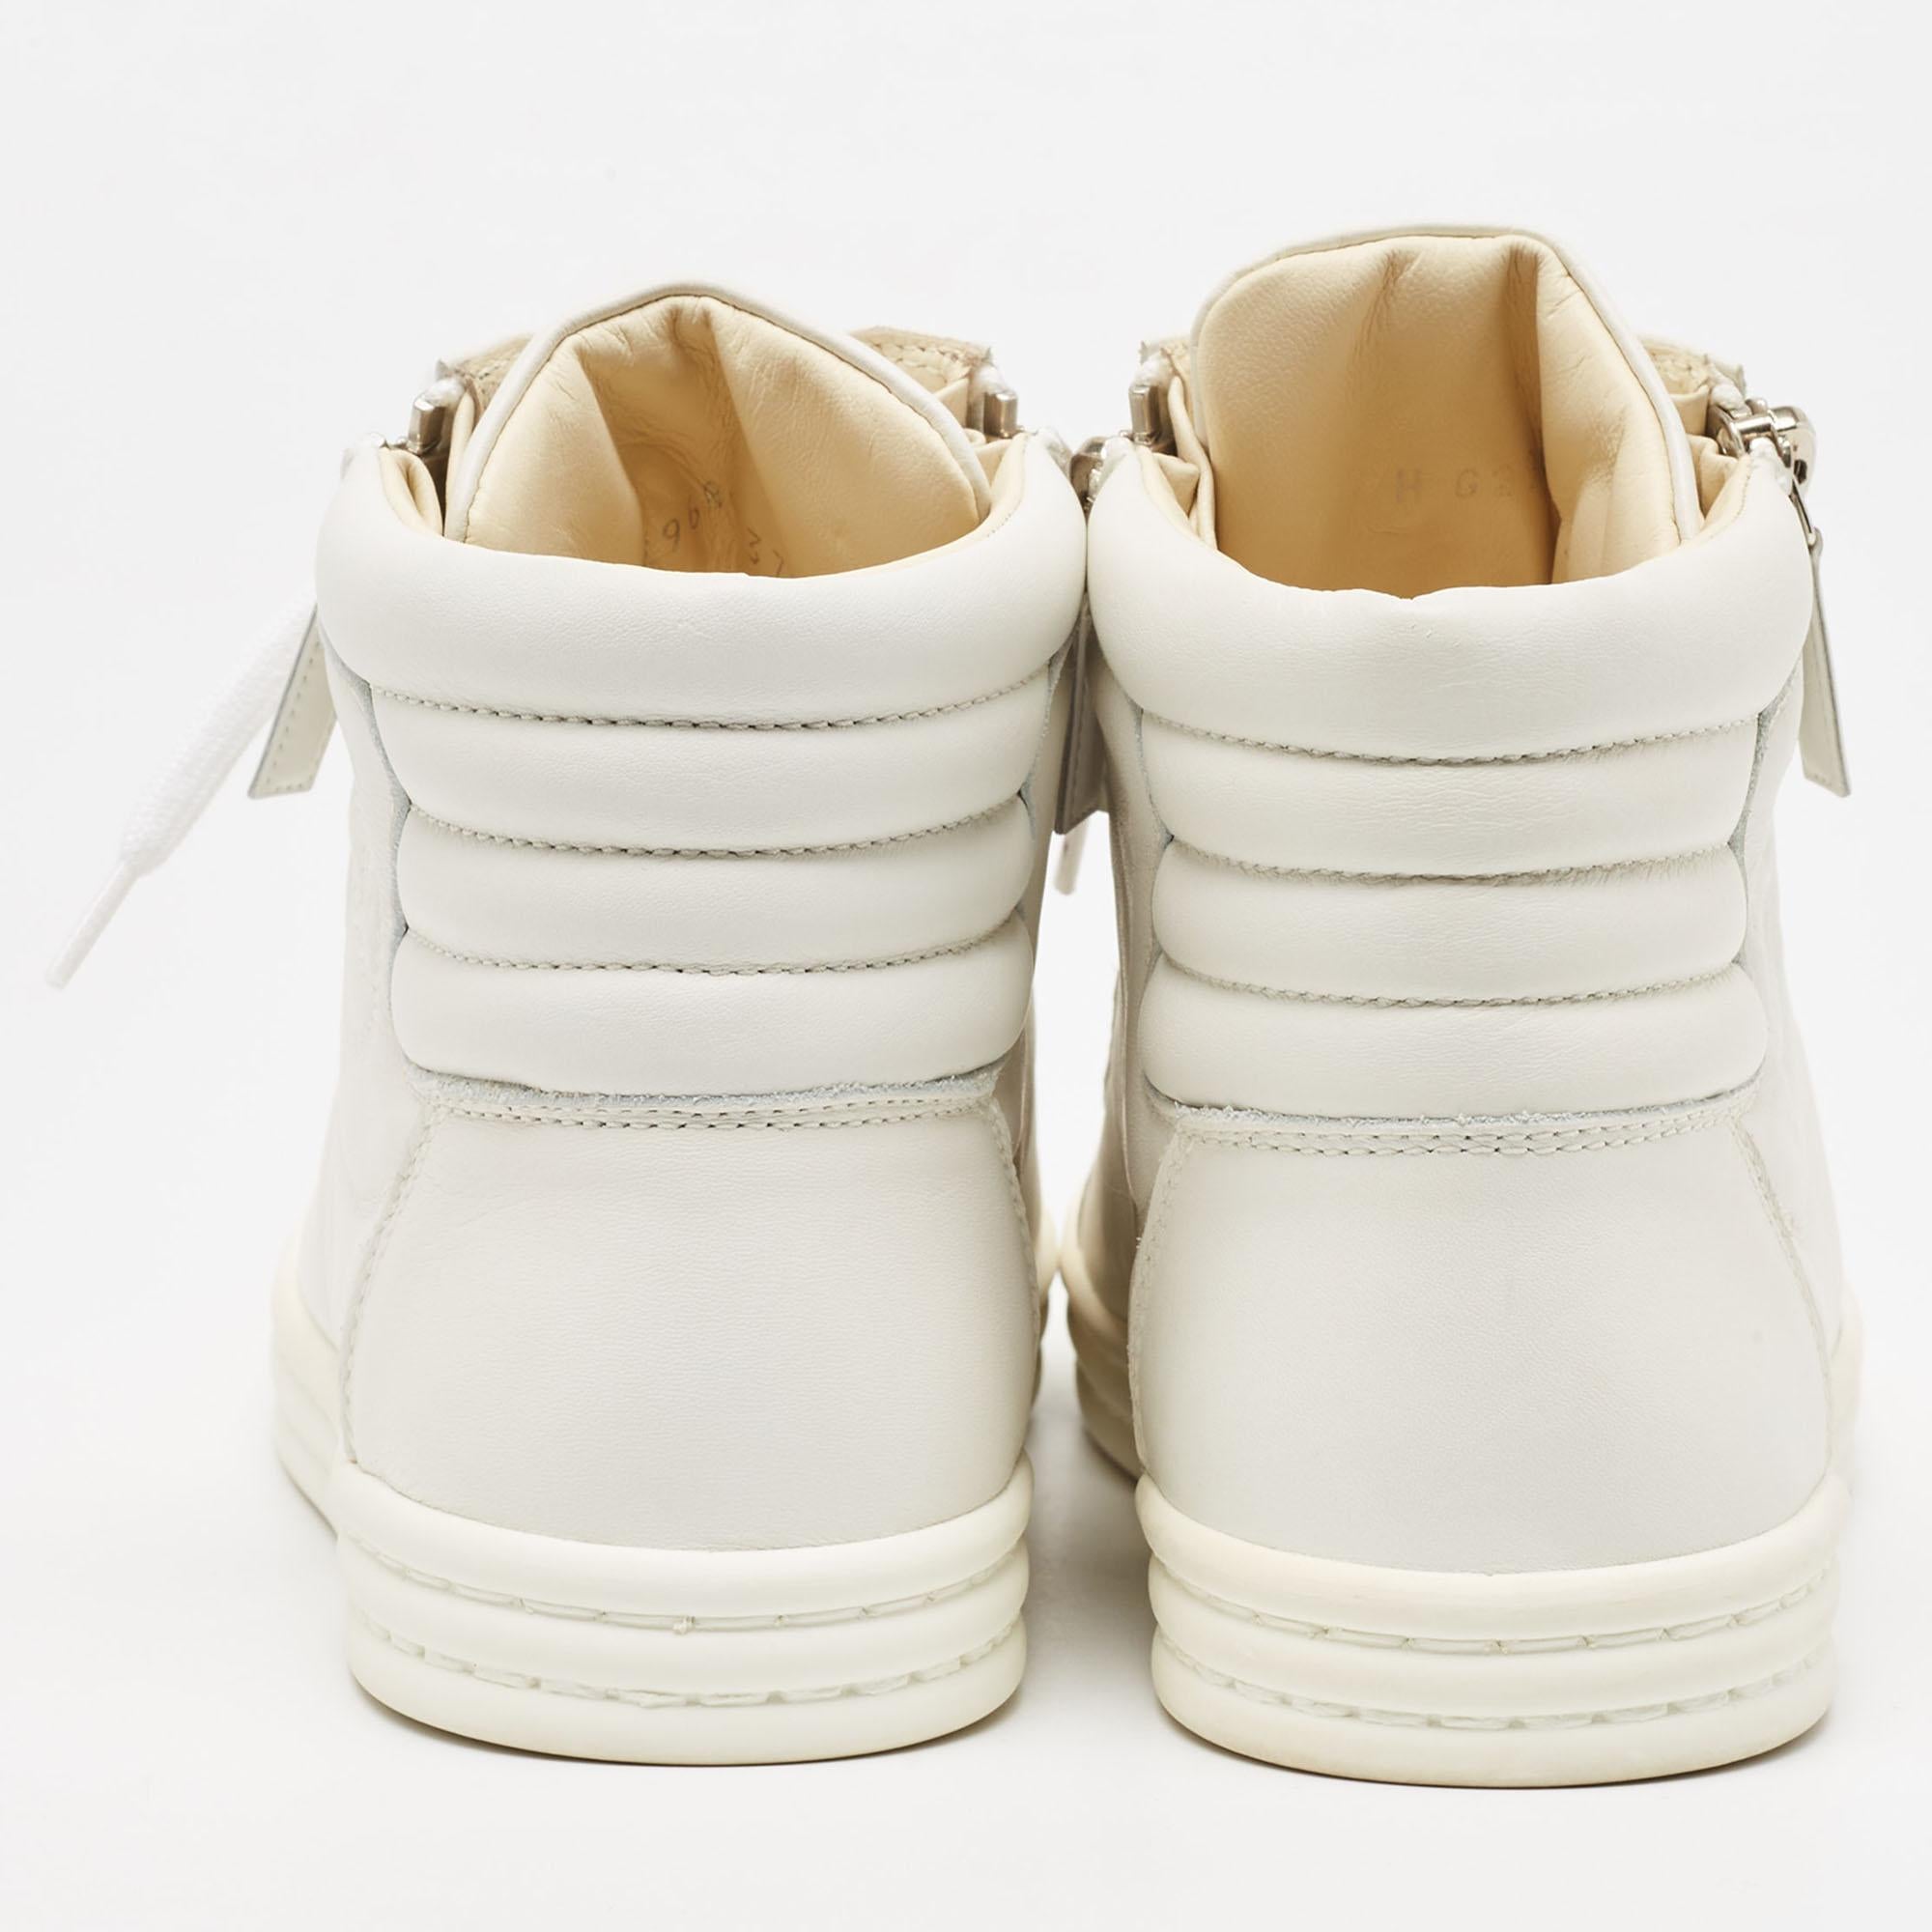 Chanel White Leather CC High Top Sneakers Size 37.5 3